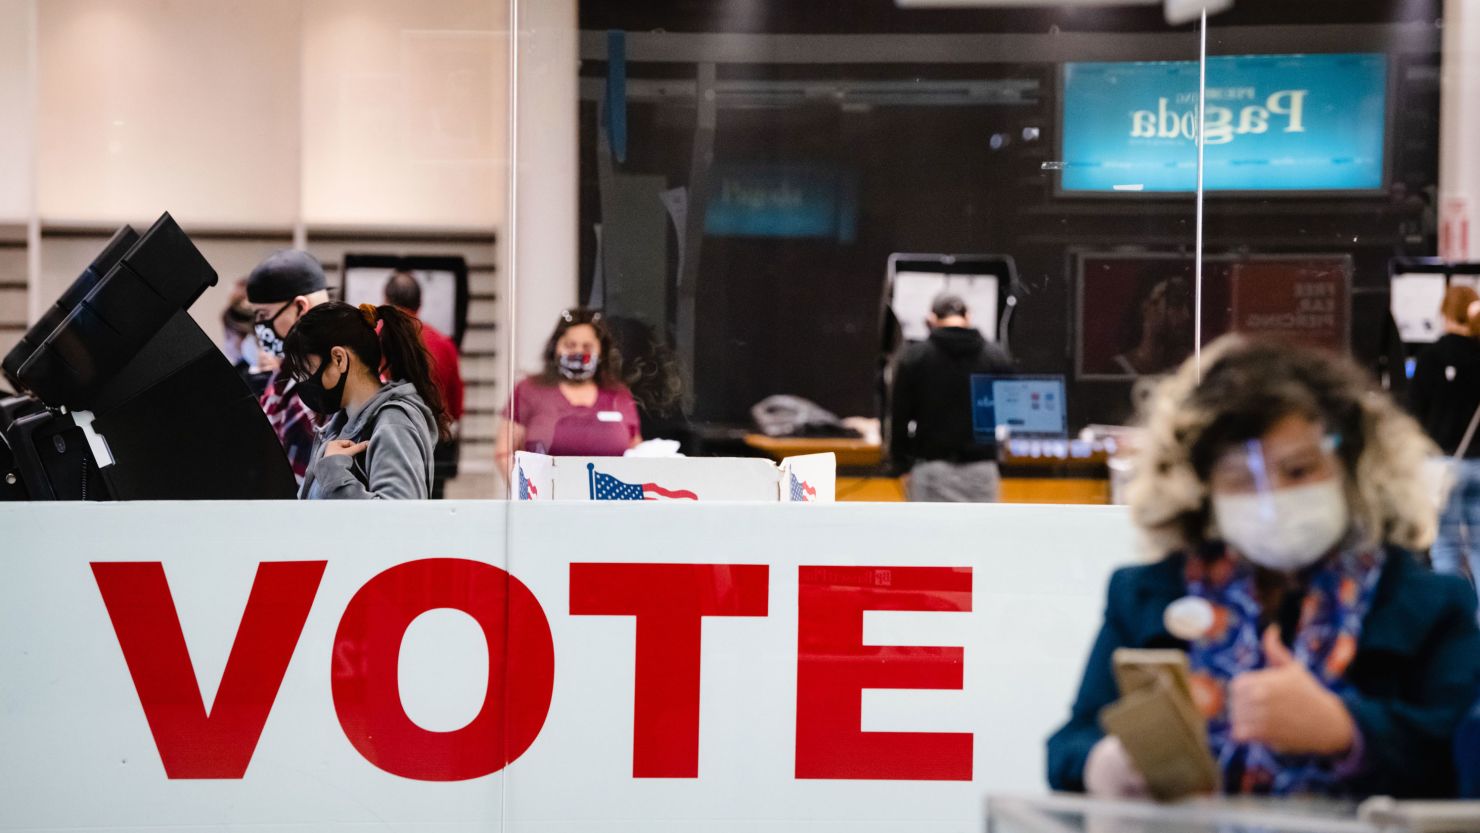 A woman votes in the general election at the Basset Place Mall in El Paso, Texas, on November 3, 2020.